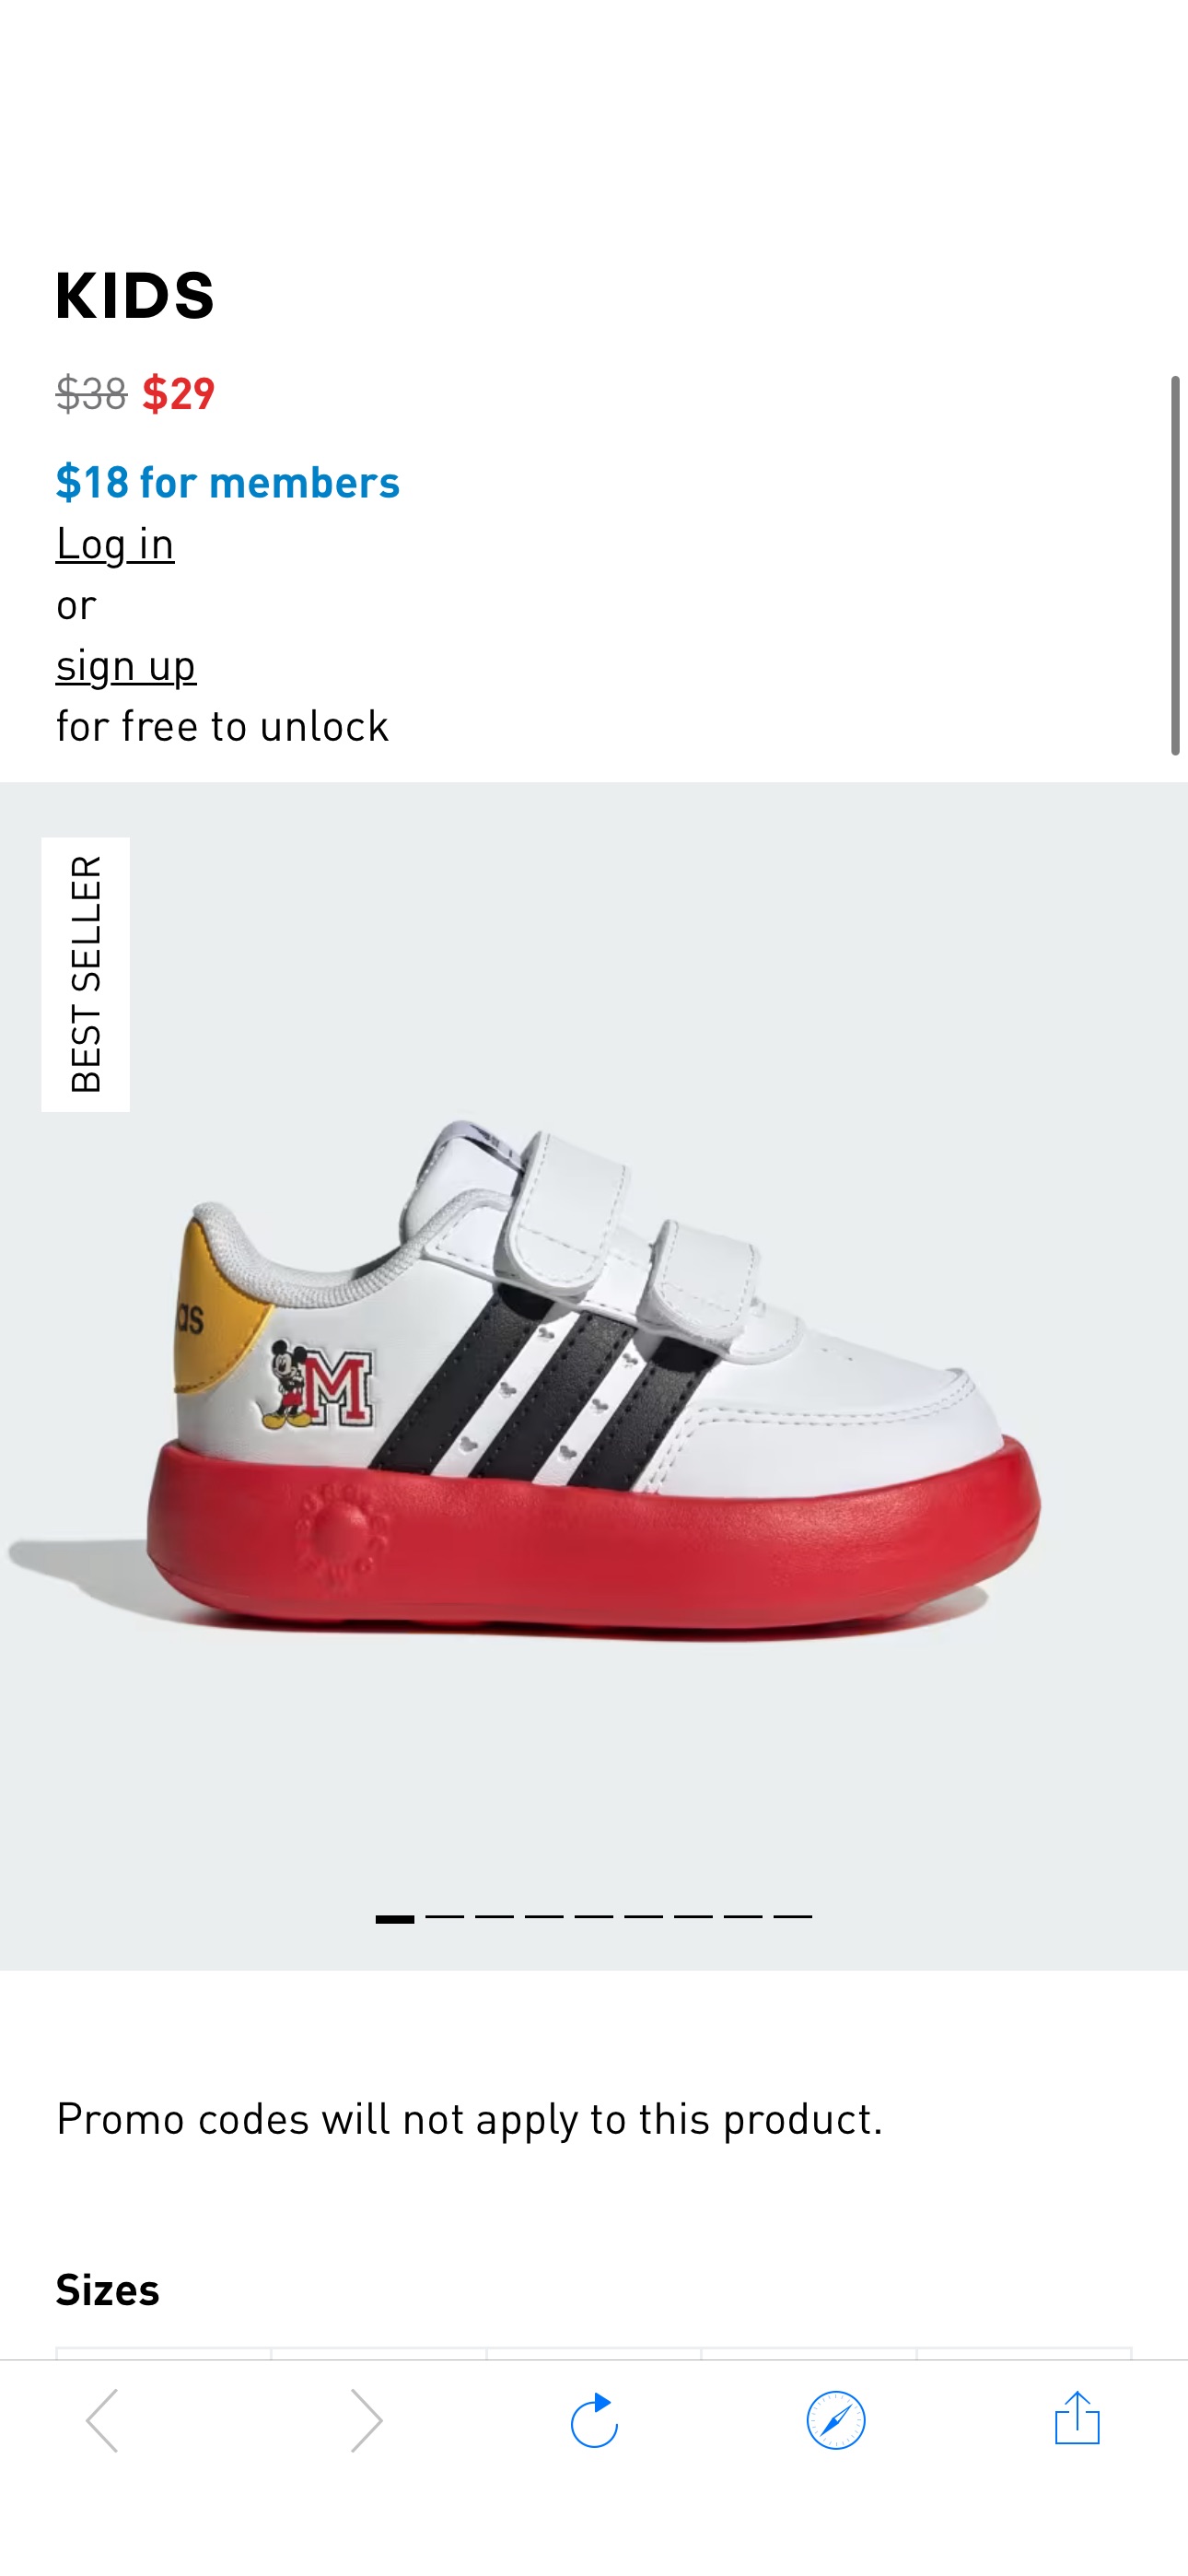 adidas Kids' Lifestyle Disney Breaknet 2.0 Shoes Kids - White adidas US DISNEY BREAKNET 2.0 SHOES KIDS
Log in and use code OFF15